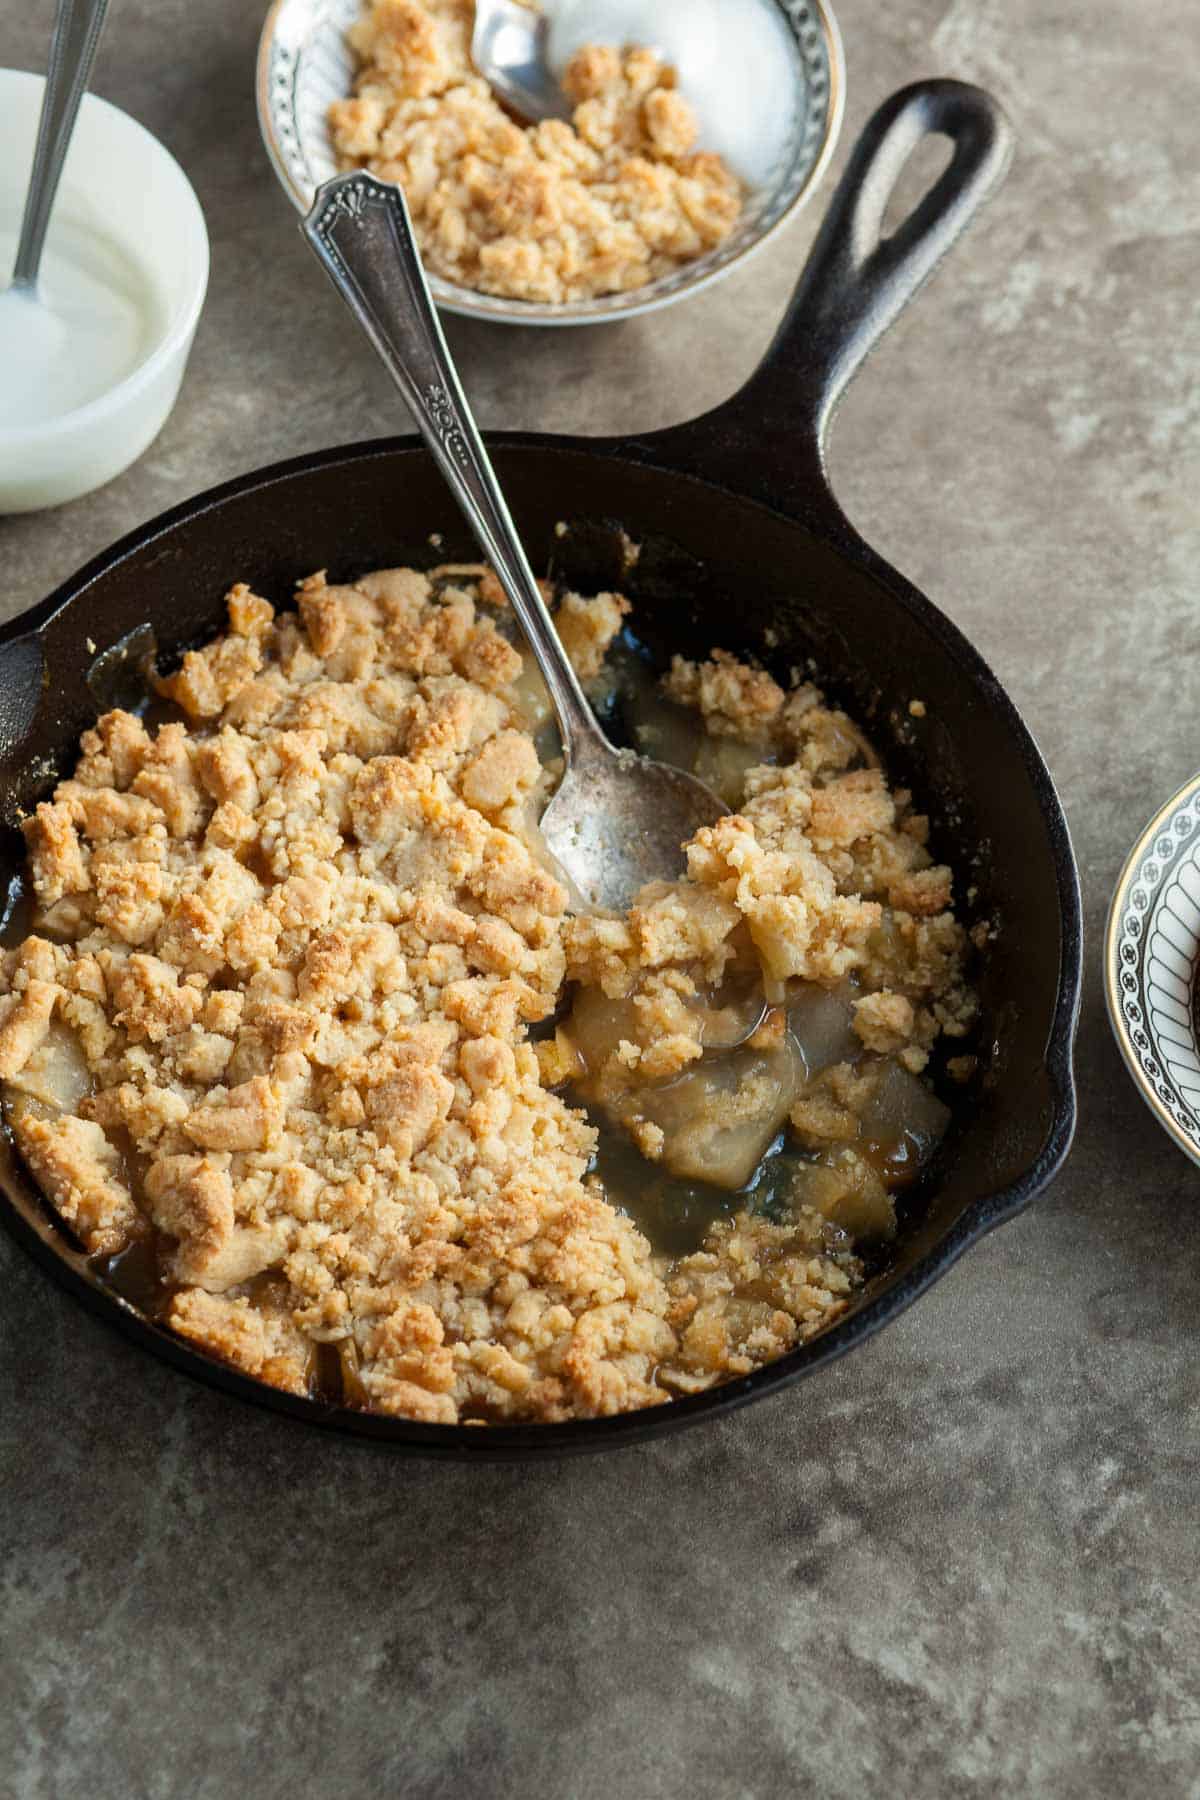 Gluten-Free Apple Crumble in Pan with Serving Spoon